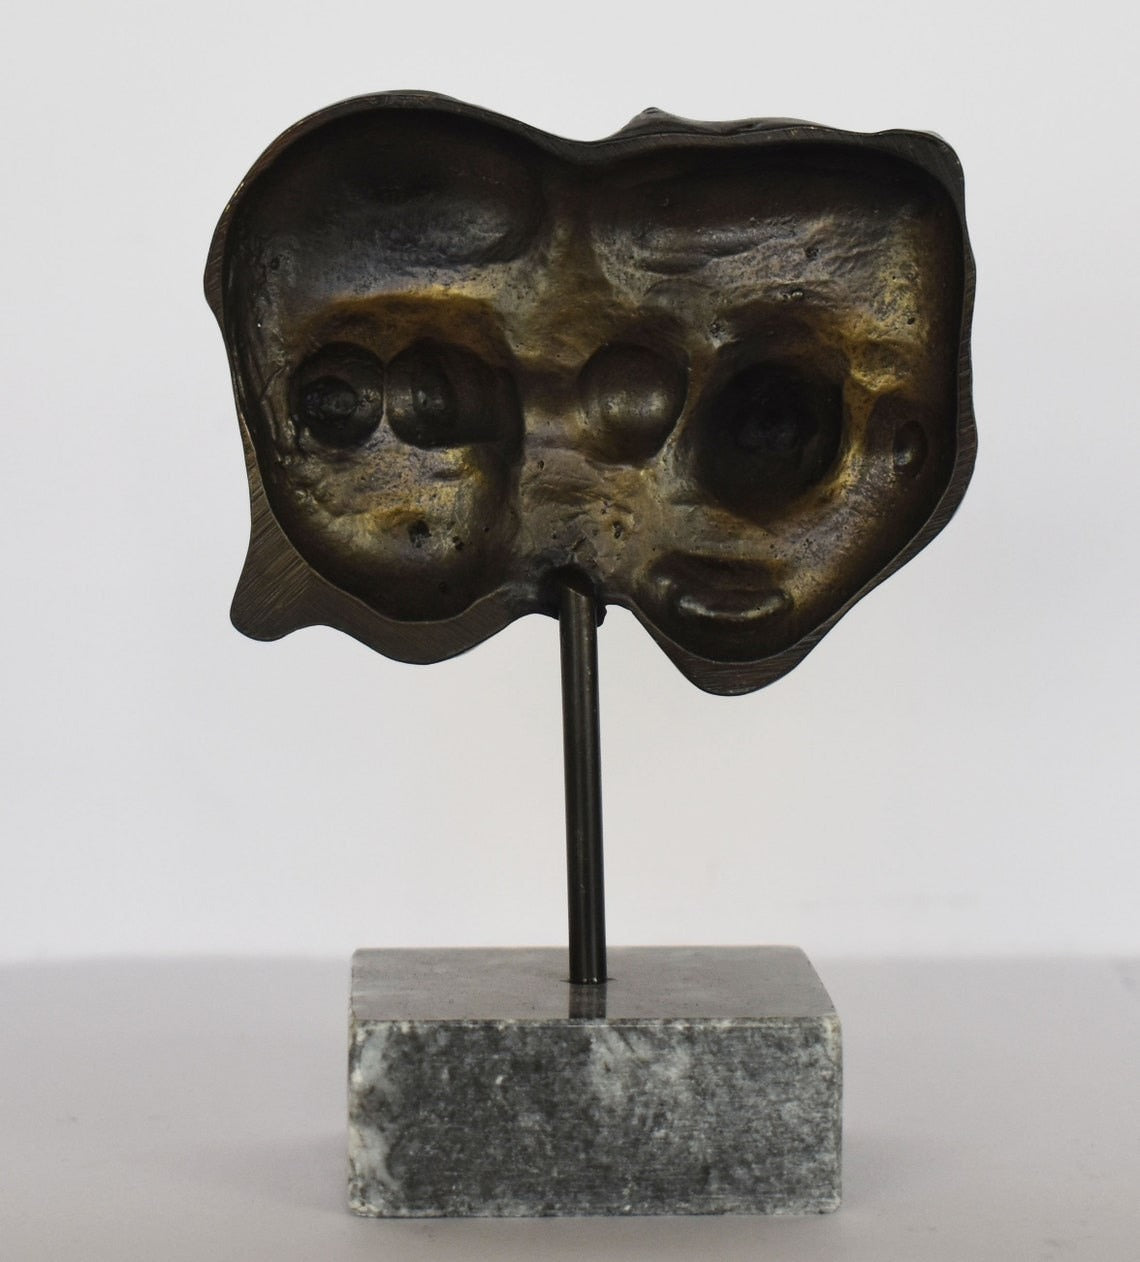 Comedy and Tragedy - Ancient Greek Theater Masks - marble base - pure bronze statue